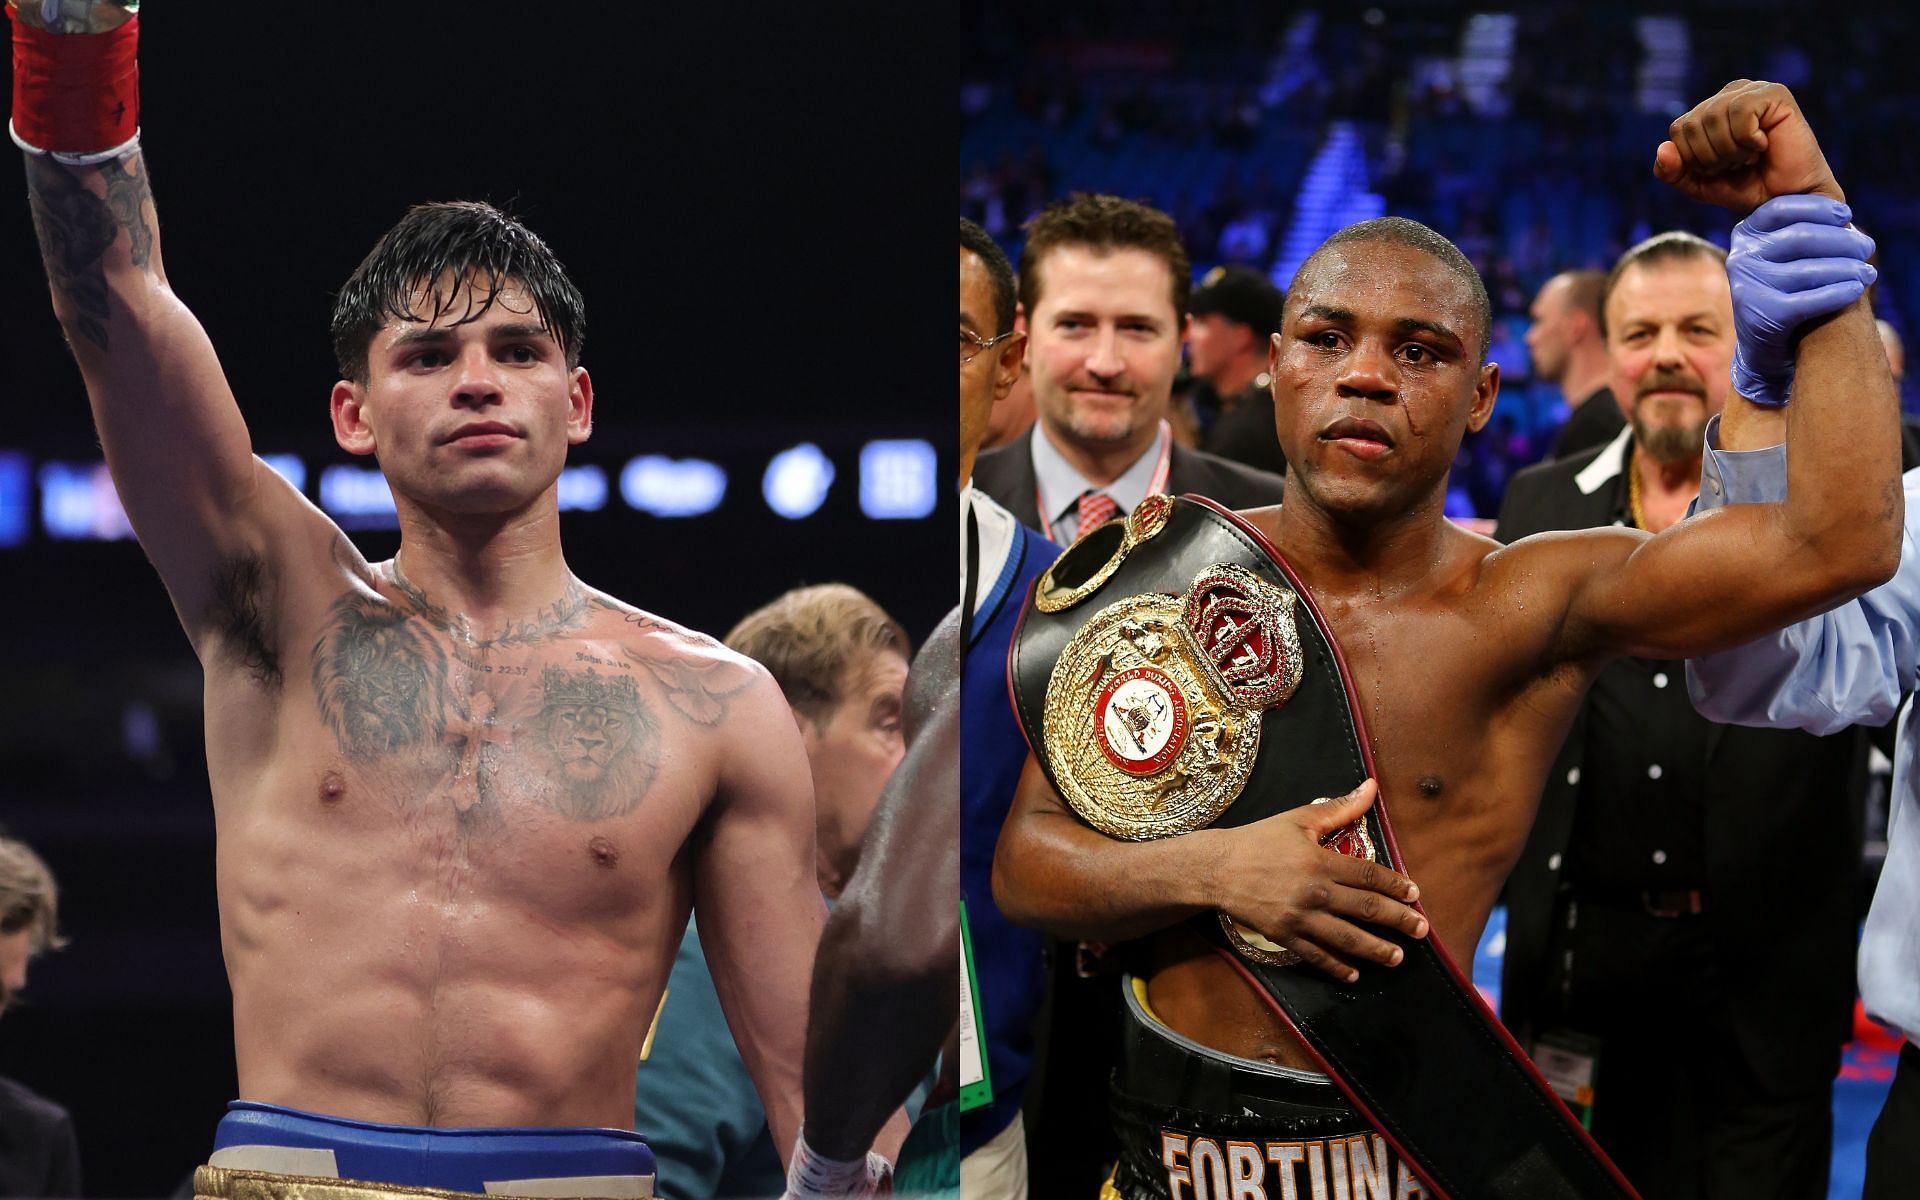 Ryan Garcia (left) and Javier Fortuna (right) (Image credits Getty Images)